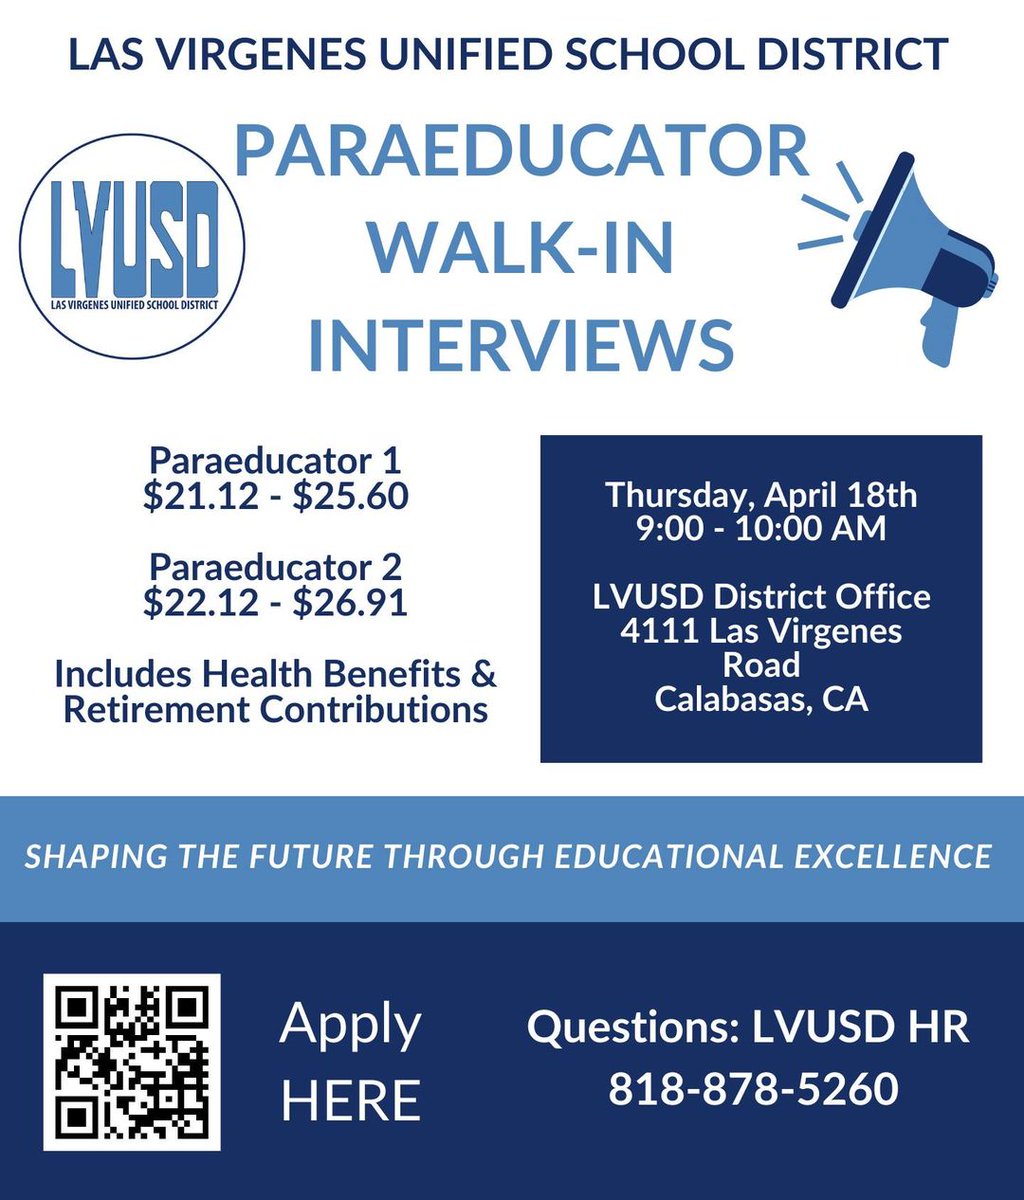 Walk-in interviews will be offered tomorrow, Thursday, April 18th from 9-10 a.m. at the District Office for paraeducator positions. Bring your resume. We hope to see you there!